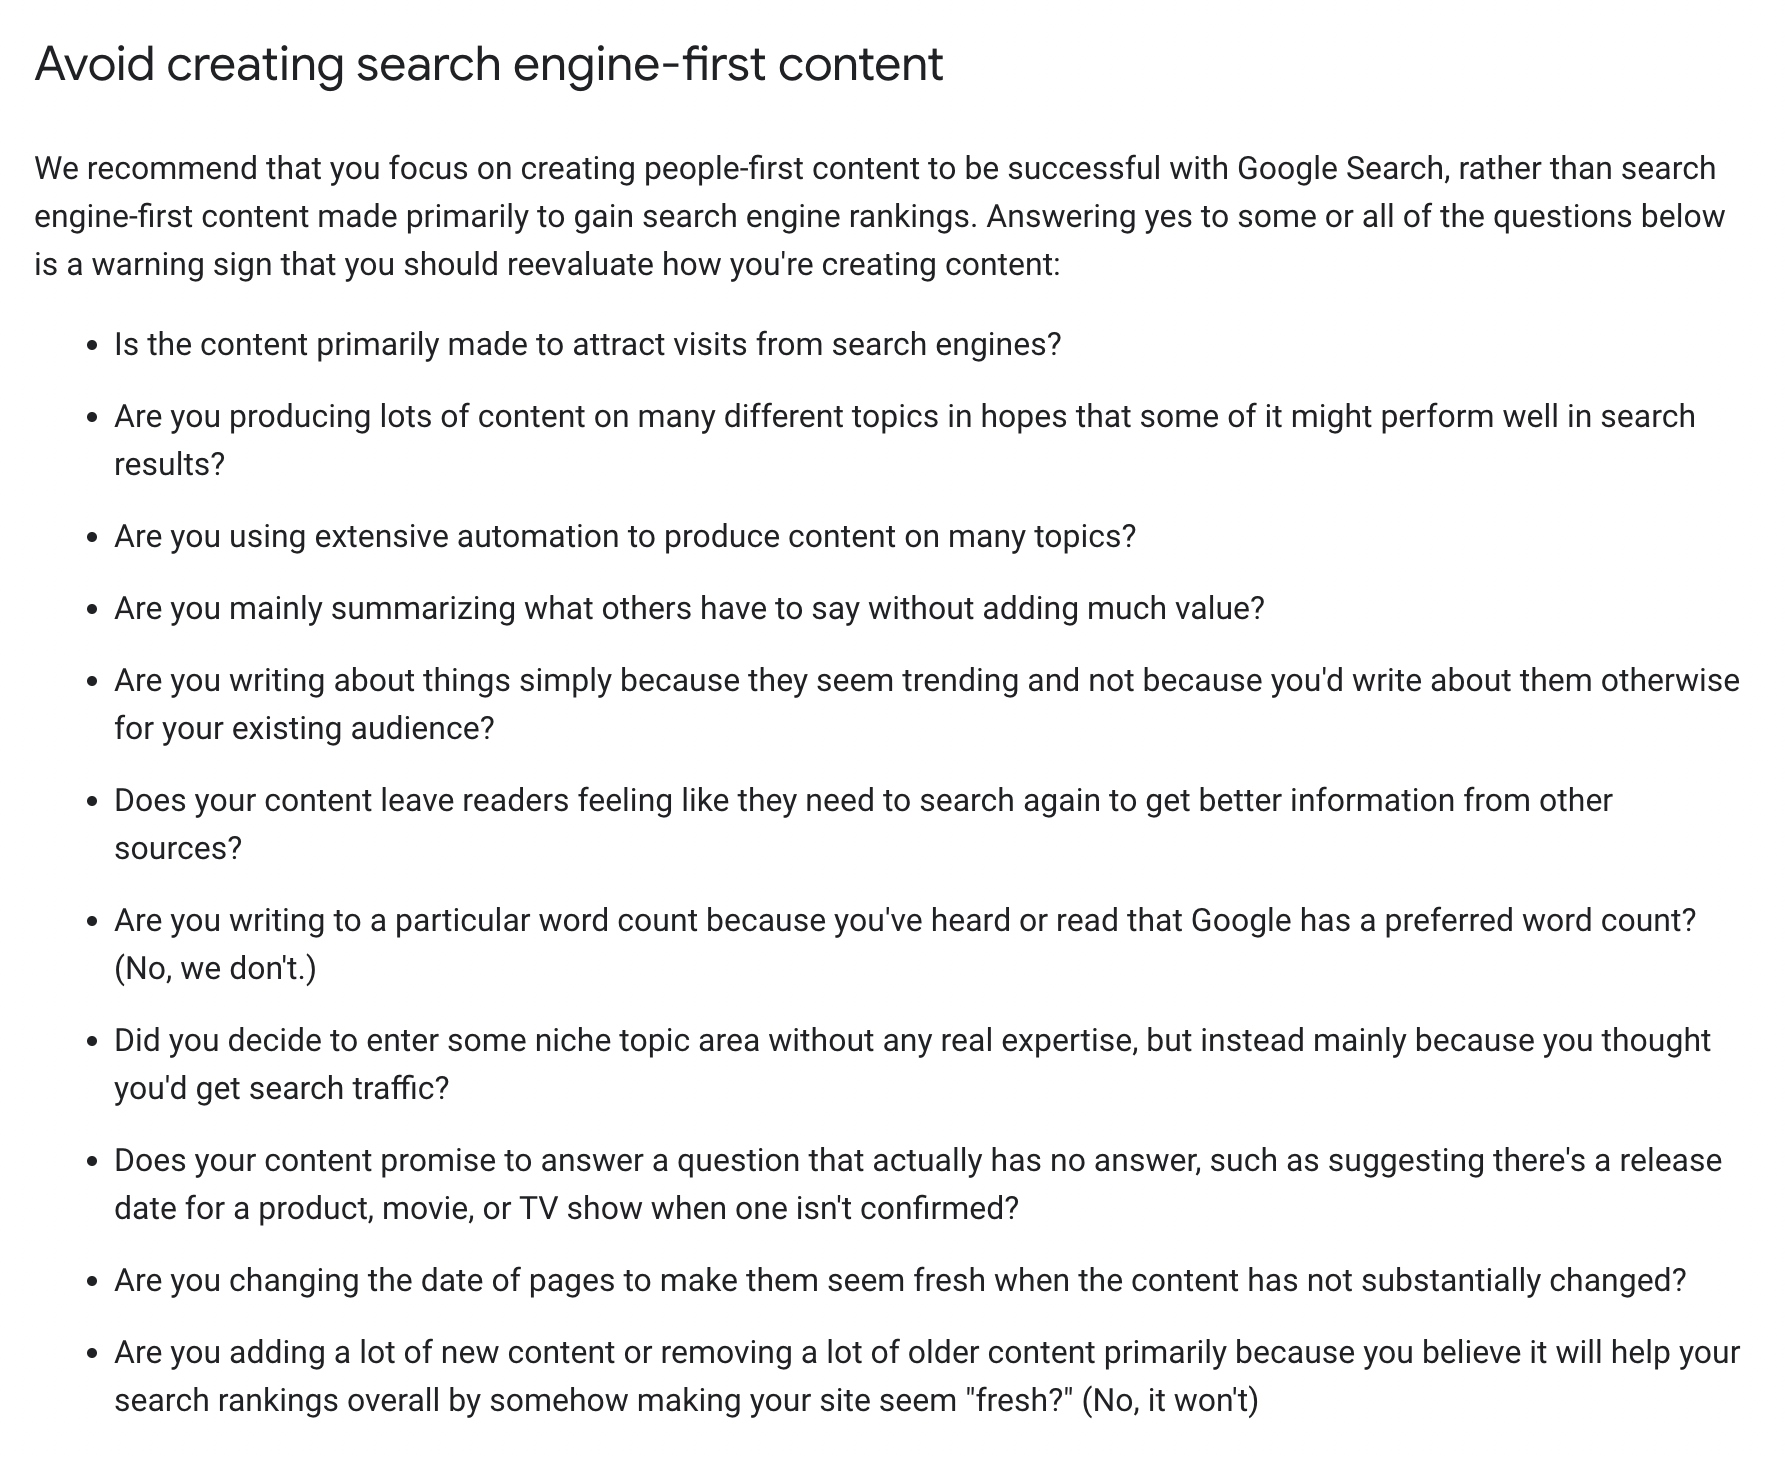 Google Search's guidance about AI-generated content